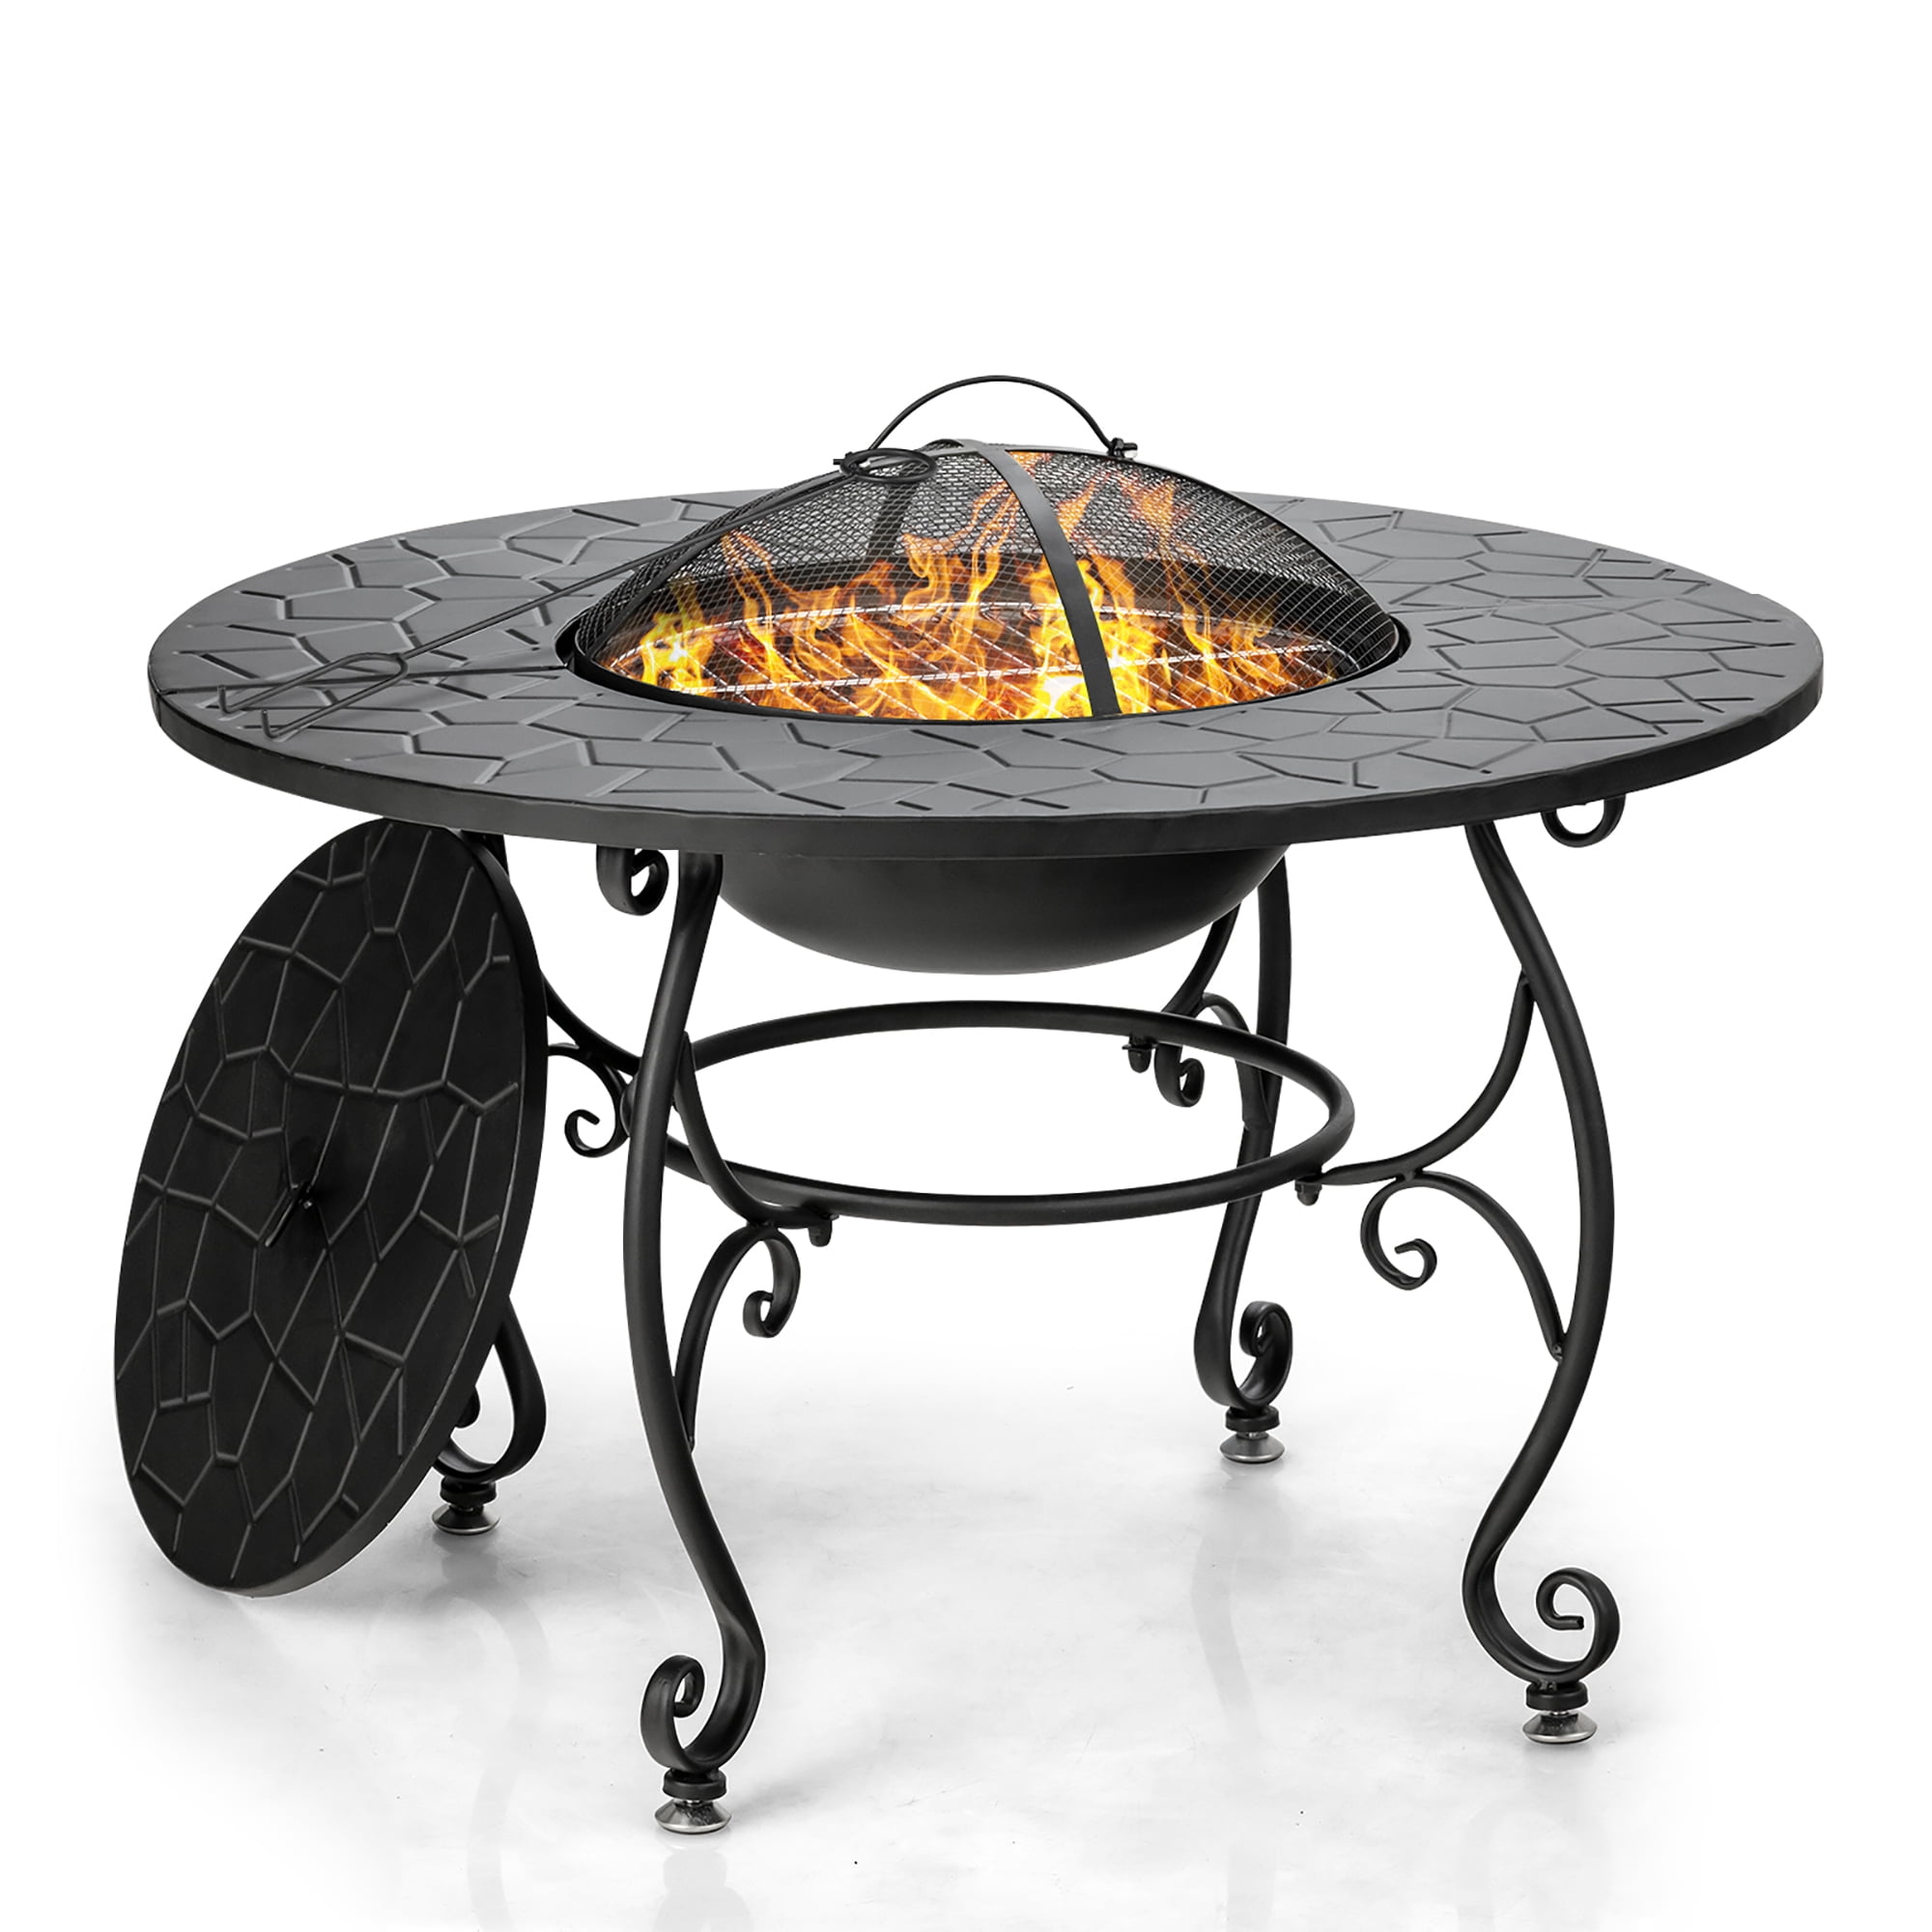 This Tricked-Out Fire Pit Is A Grill And Dining Table In One